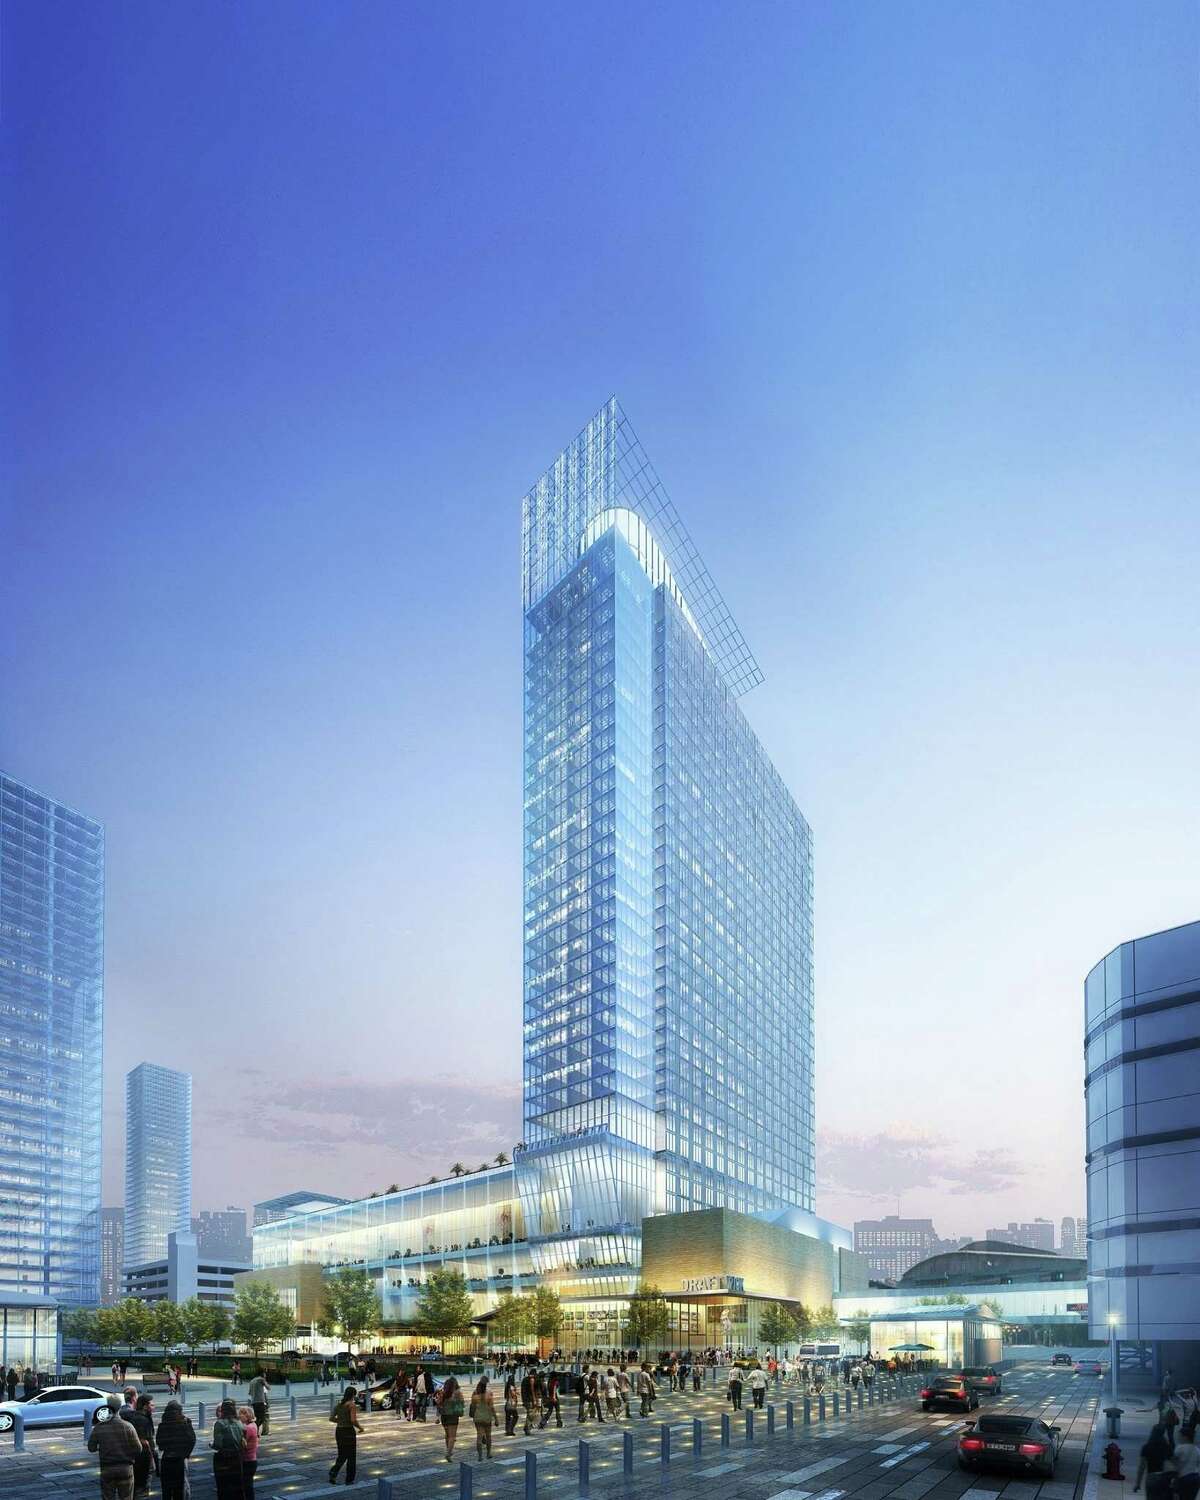 The proposed convention center hotel is to be developed by Rida Development Corp.